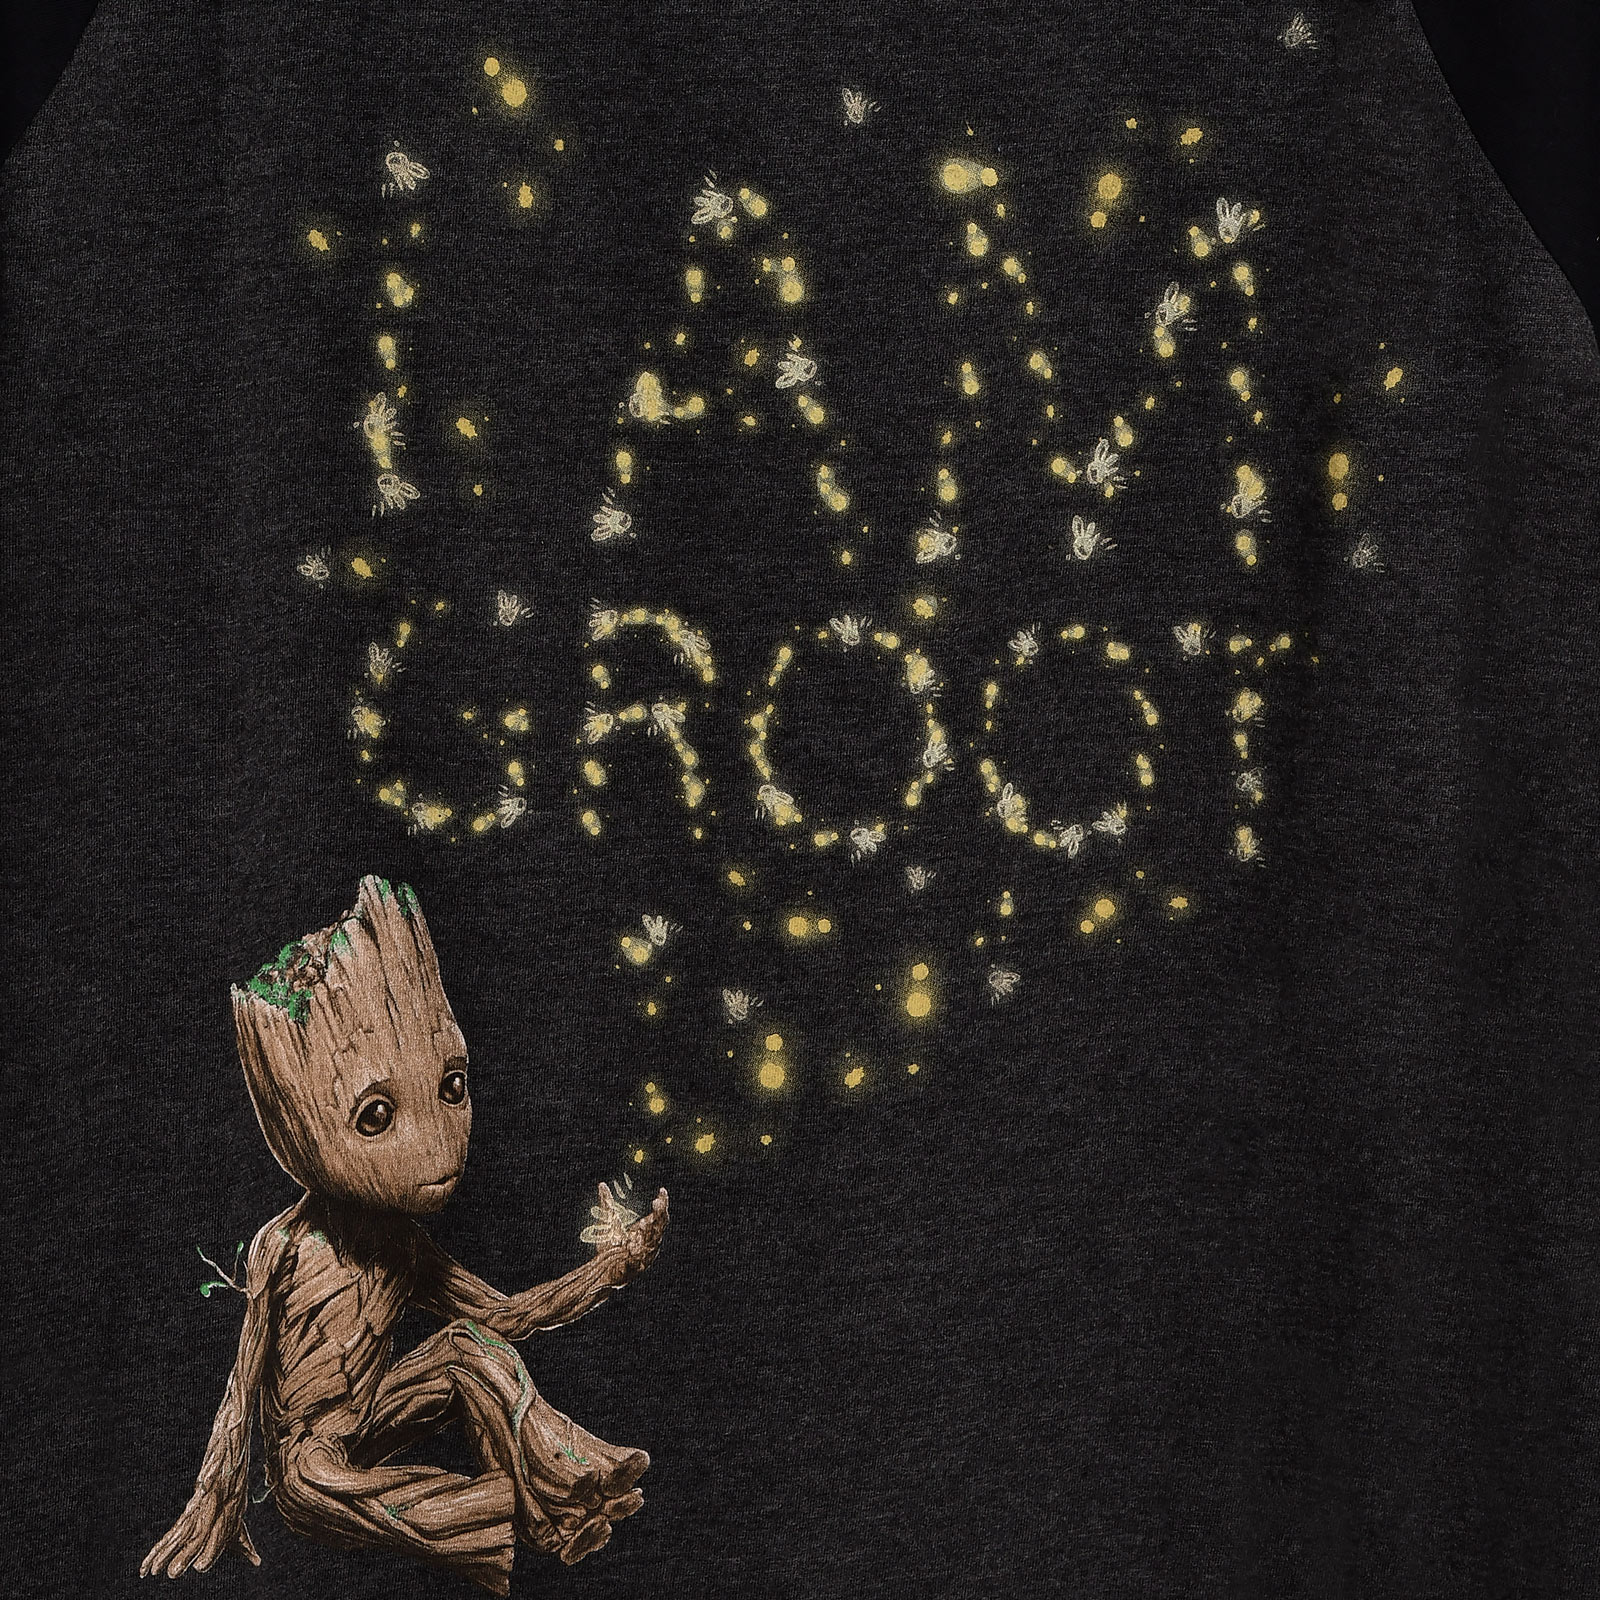 Guardians of the Galaxy - Groot Glow in the Dark T-Shirt